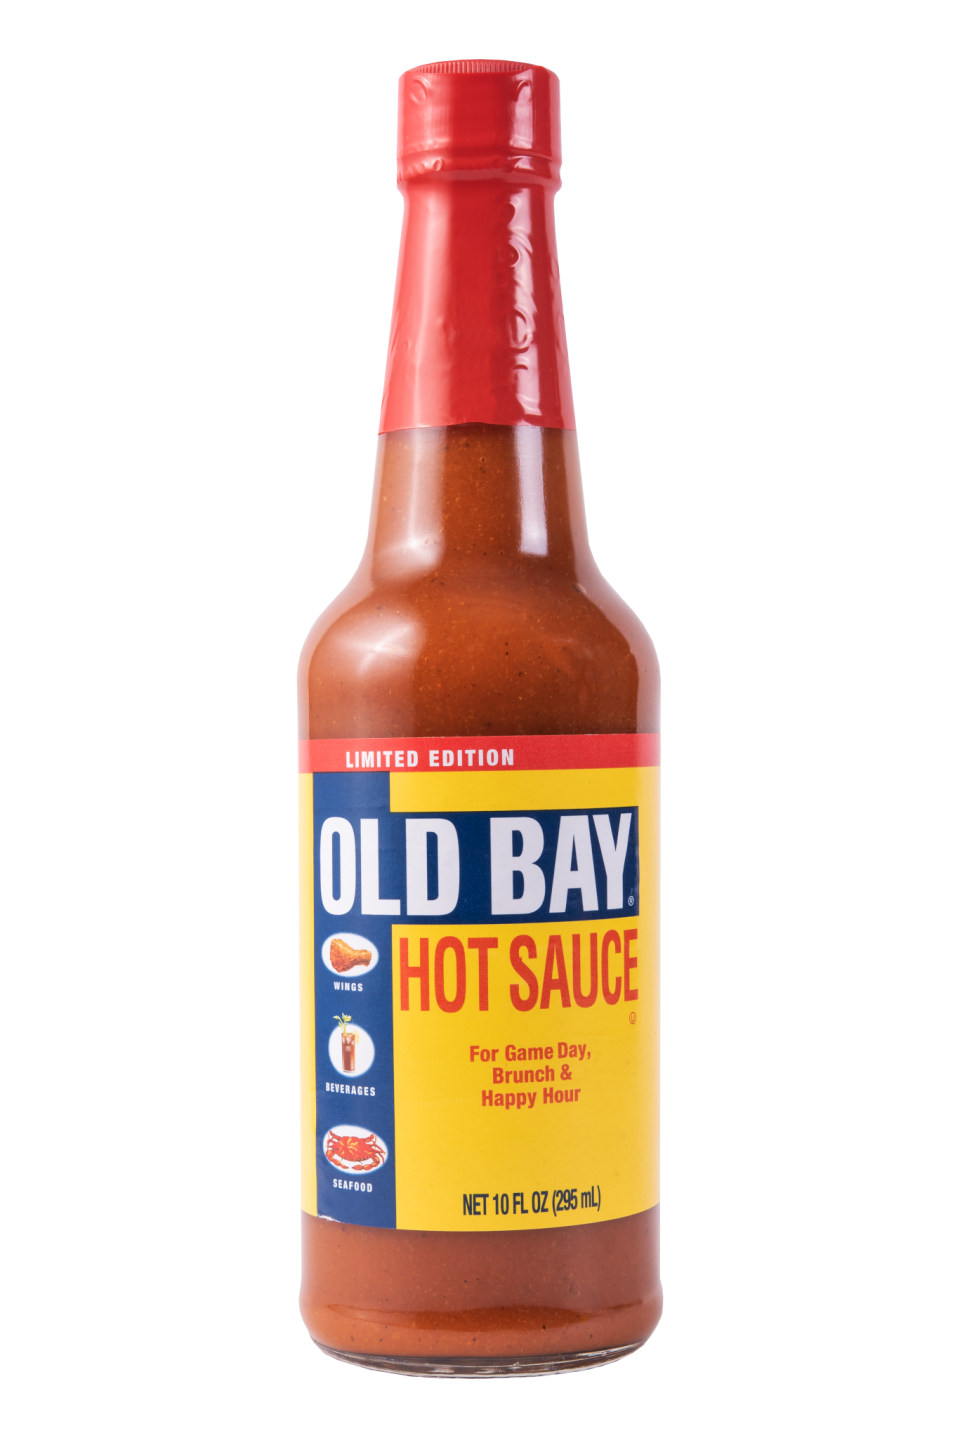 Old Bay just launched a hot sauce version of its iconic spice.